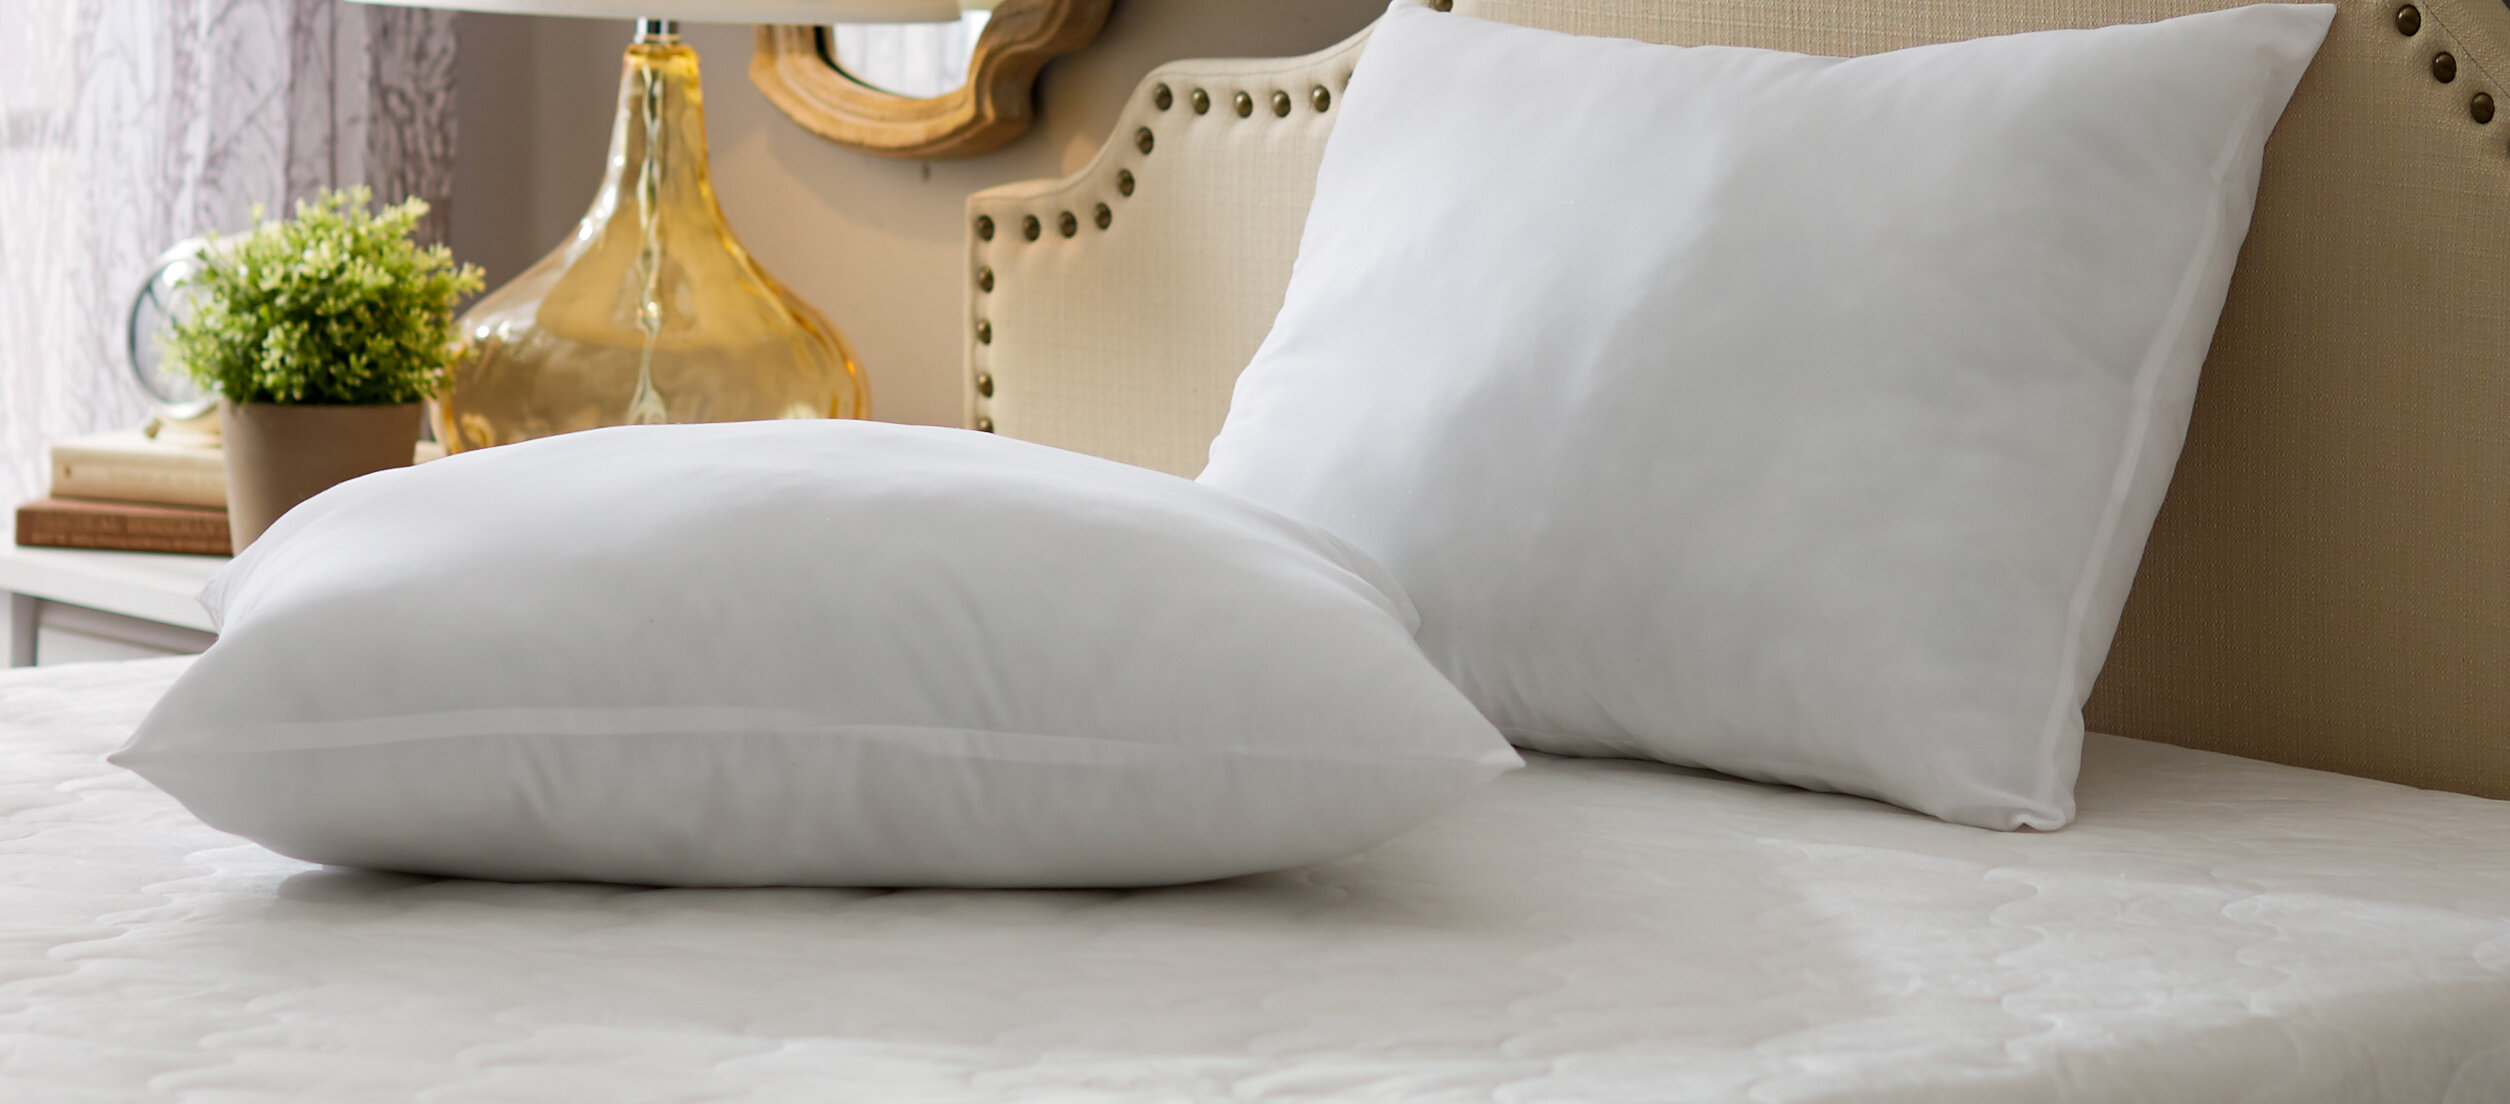 [BIG SALE] TopRated Bed Pillows You’ll Love In 2020 Wayfair